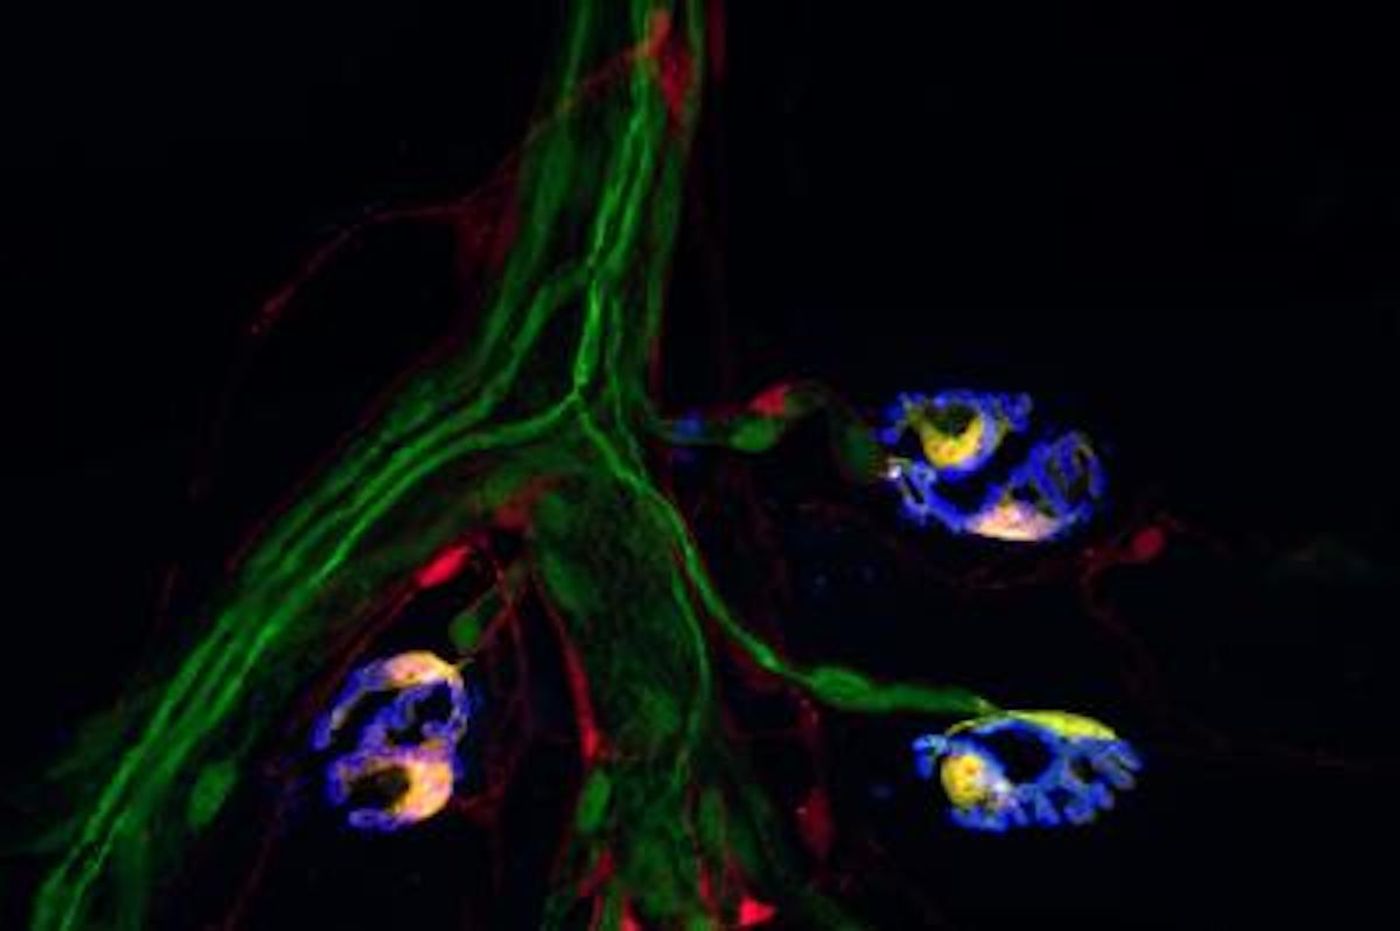 Two molecular markers, indicated by the red and green fluorescence, are found together only in synaptic Schwann cells. Together they offer a "bar code" that identifies Schwann cells, an important subtype of glia. Credit  Valdez Lab / Center for Translational Neuroscience / Brown University